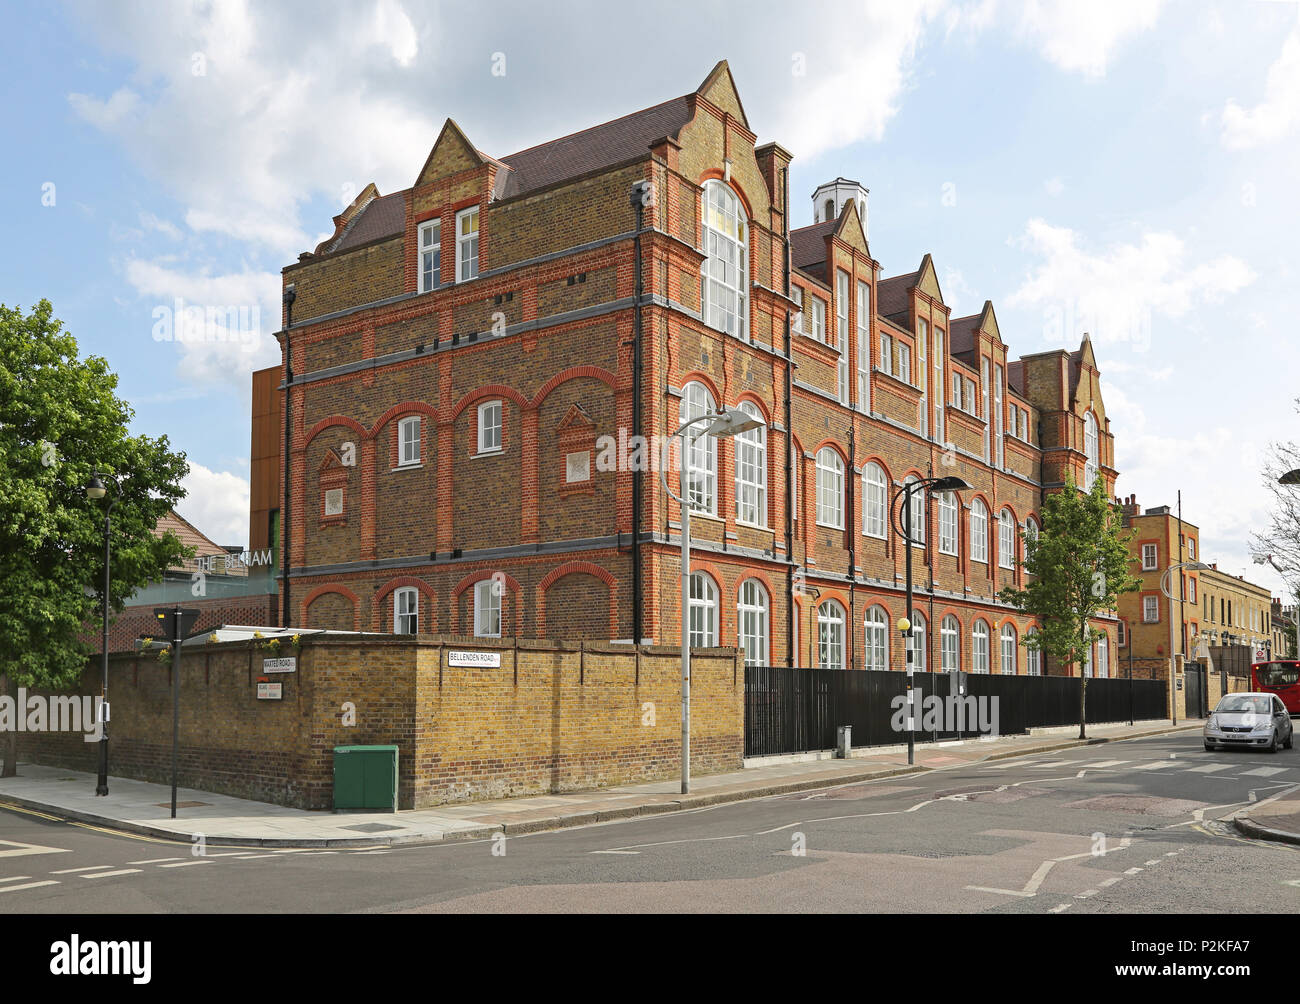 The Bellham Primary School in Peckham, south London, UK. A new, state-funded academy school housed in a newly refurbished, Victorian, school building Stock Photo